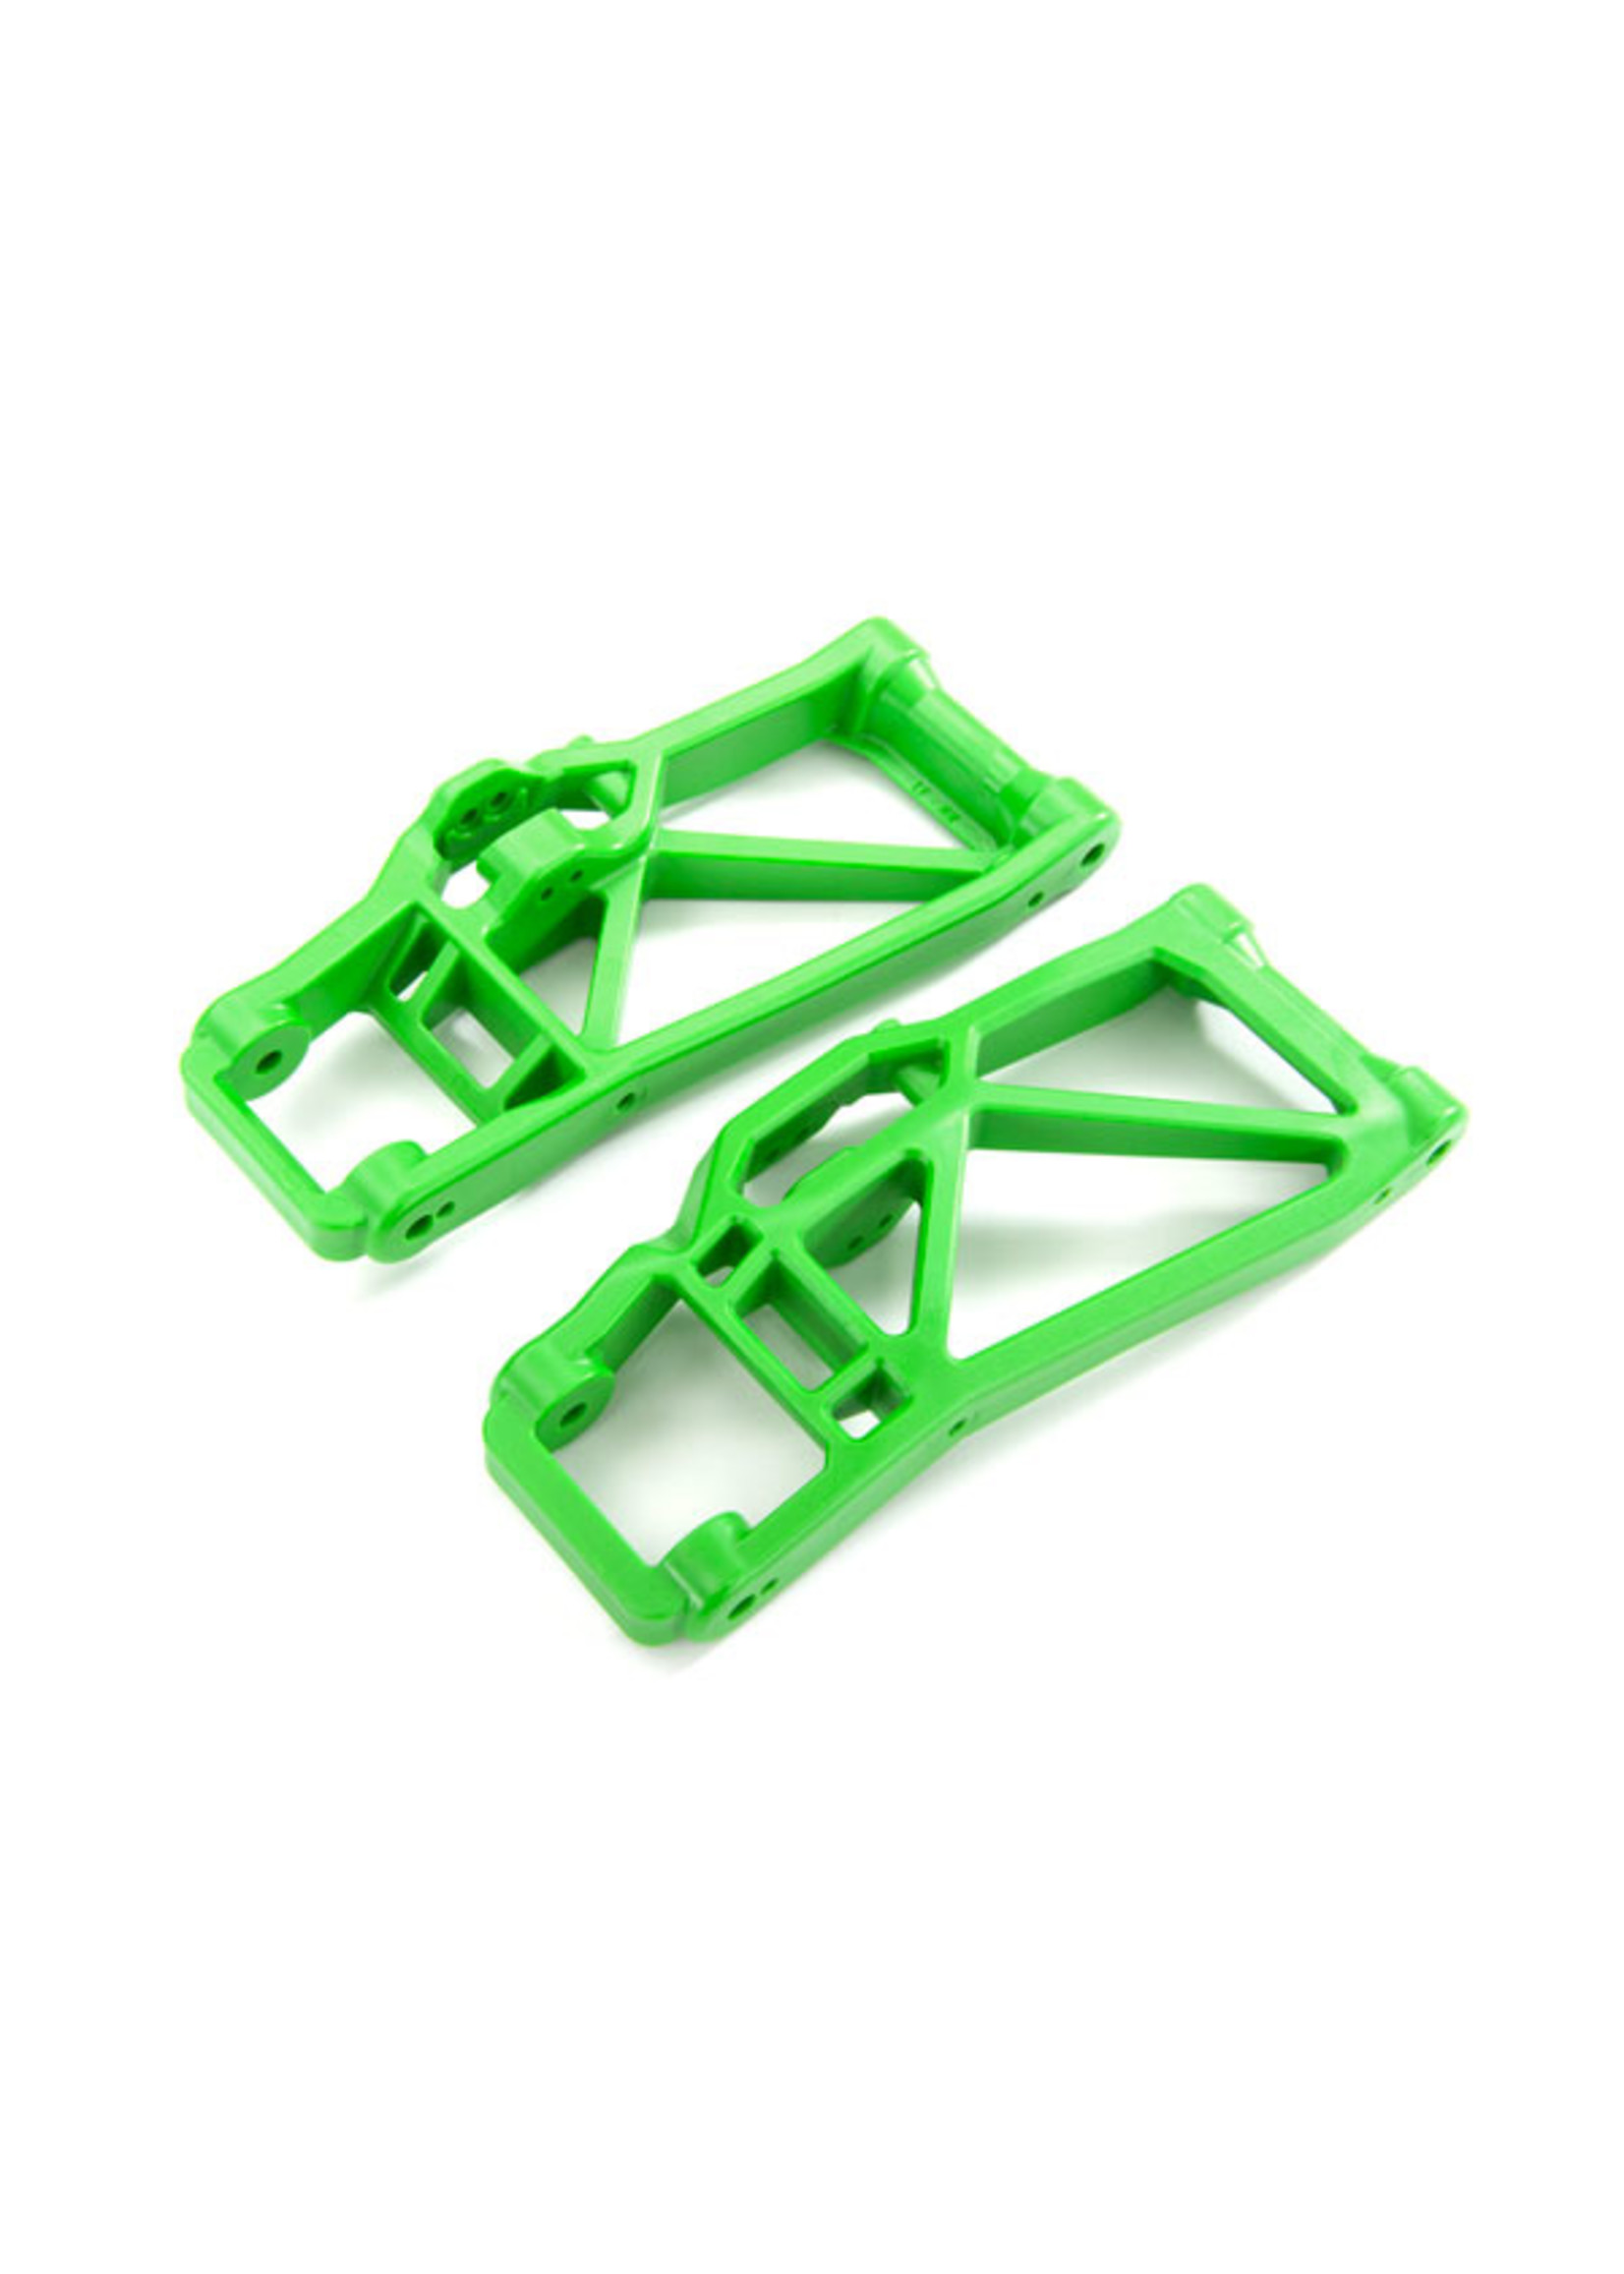 Traxxas 8930G - Lower Suspension Arms - Green